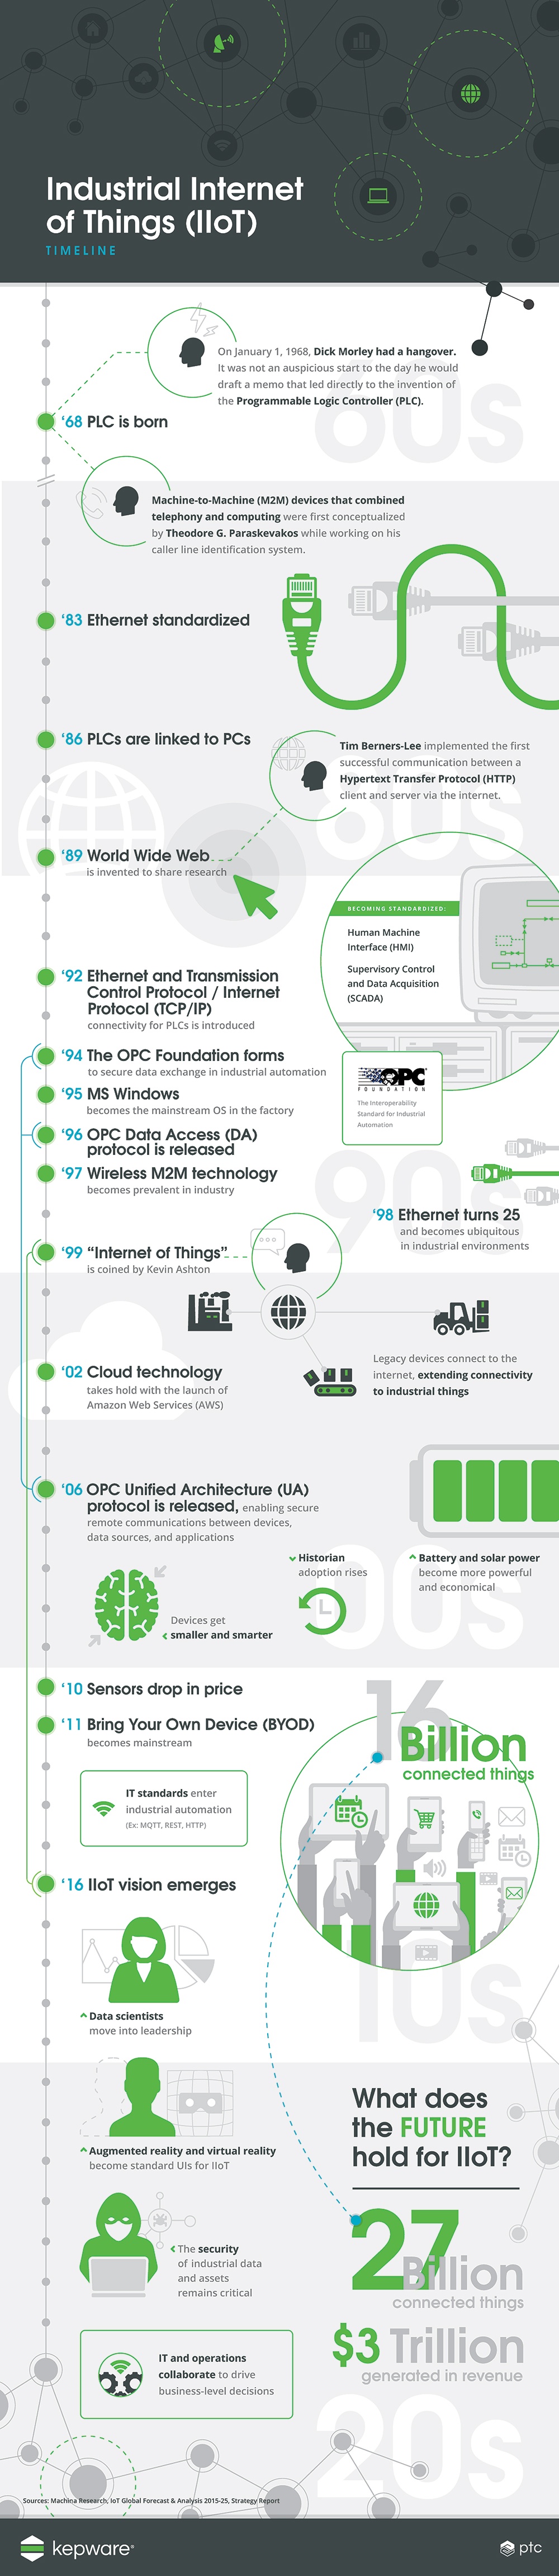 Timeline of the Industrial Internet of Things